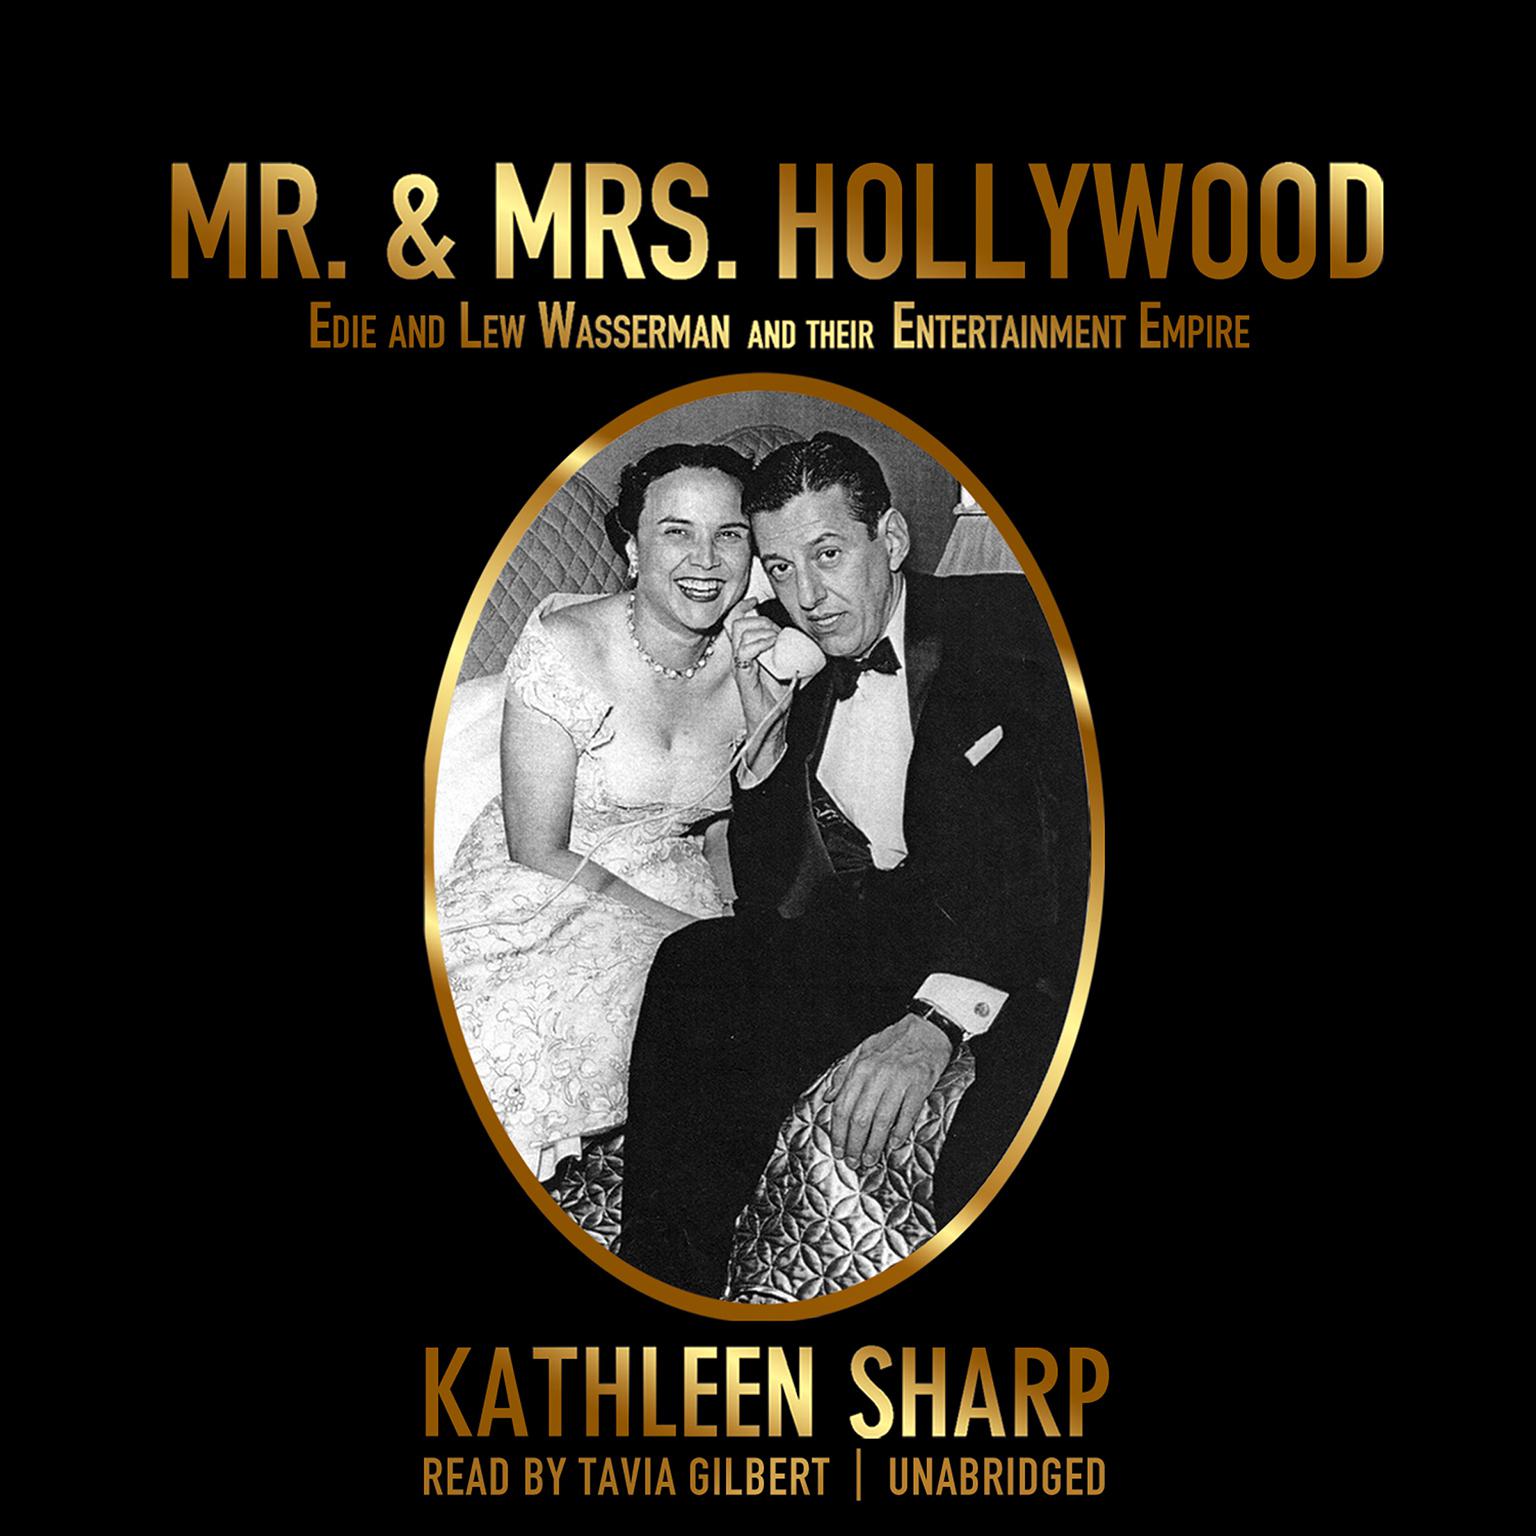 Mr. & Mrs. Hollywood: Edie and Lew Wasserman and Their Entertainment Empire Audiobook, by Kathleen Sharp